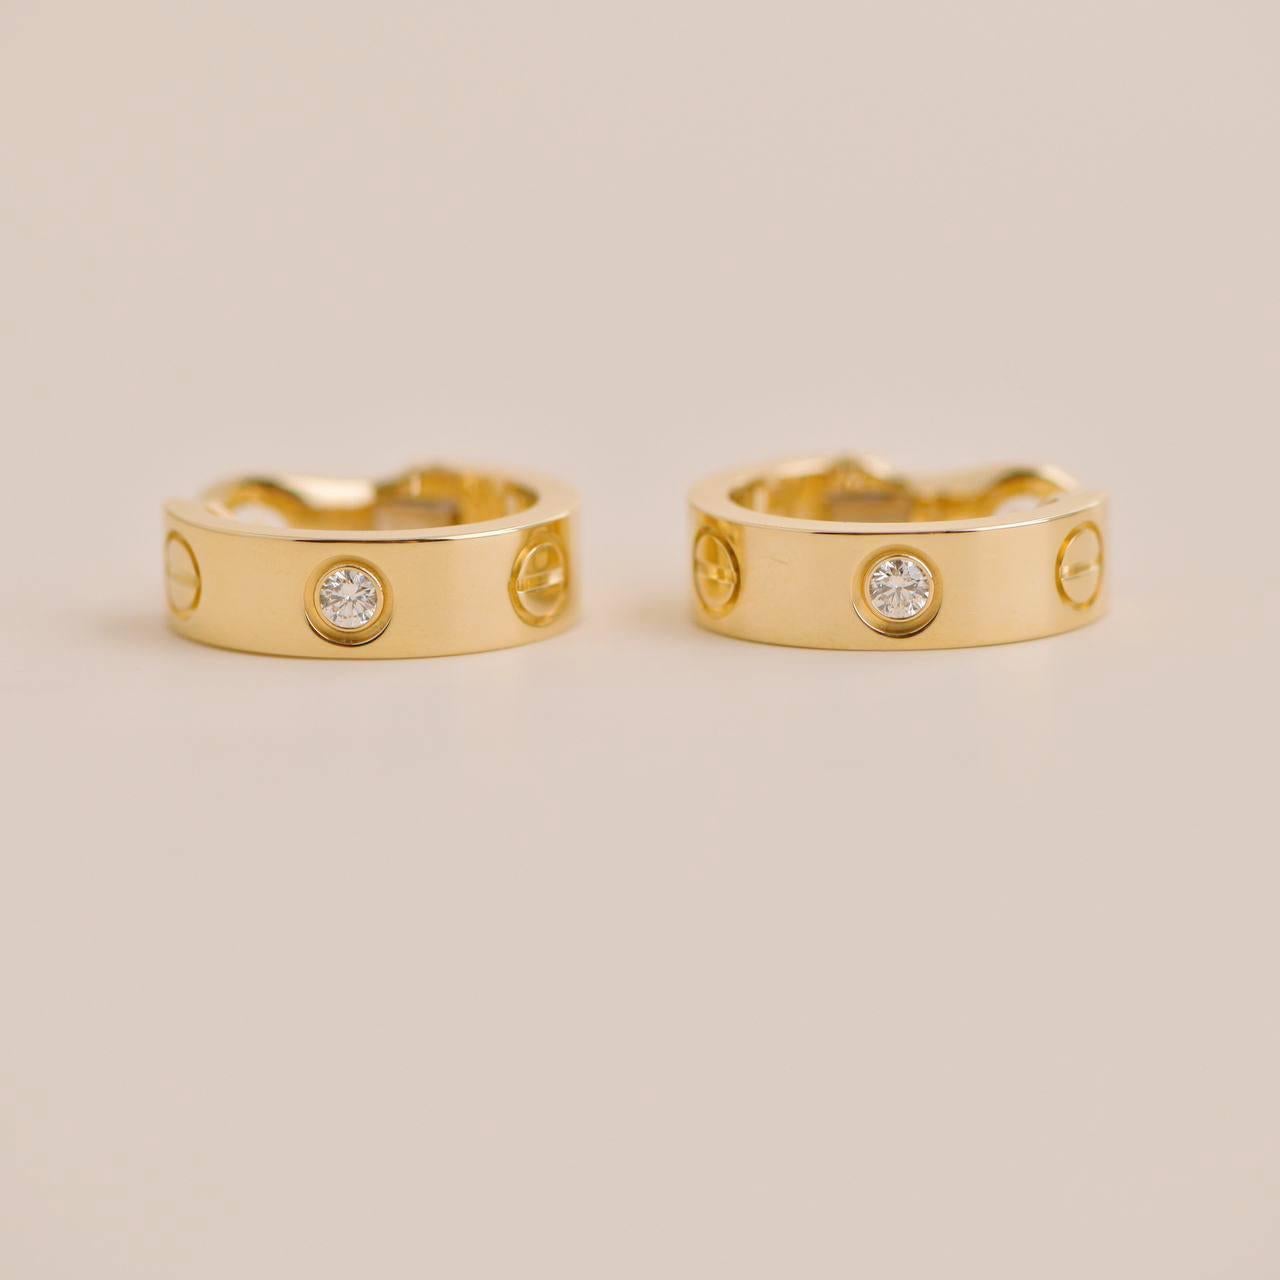 Cartier LOVE 18K Yellow Gold Diamond Earrings In Excellent Condition For Sale In Banbury, GB